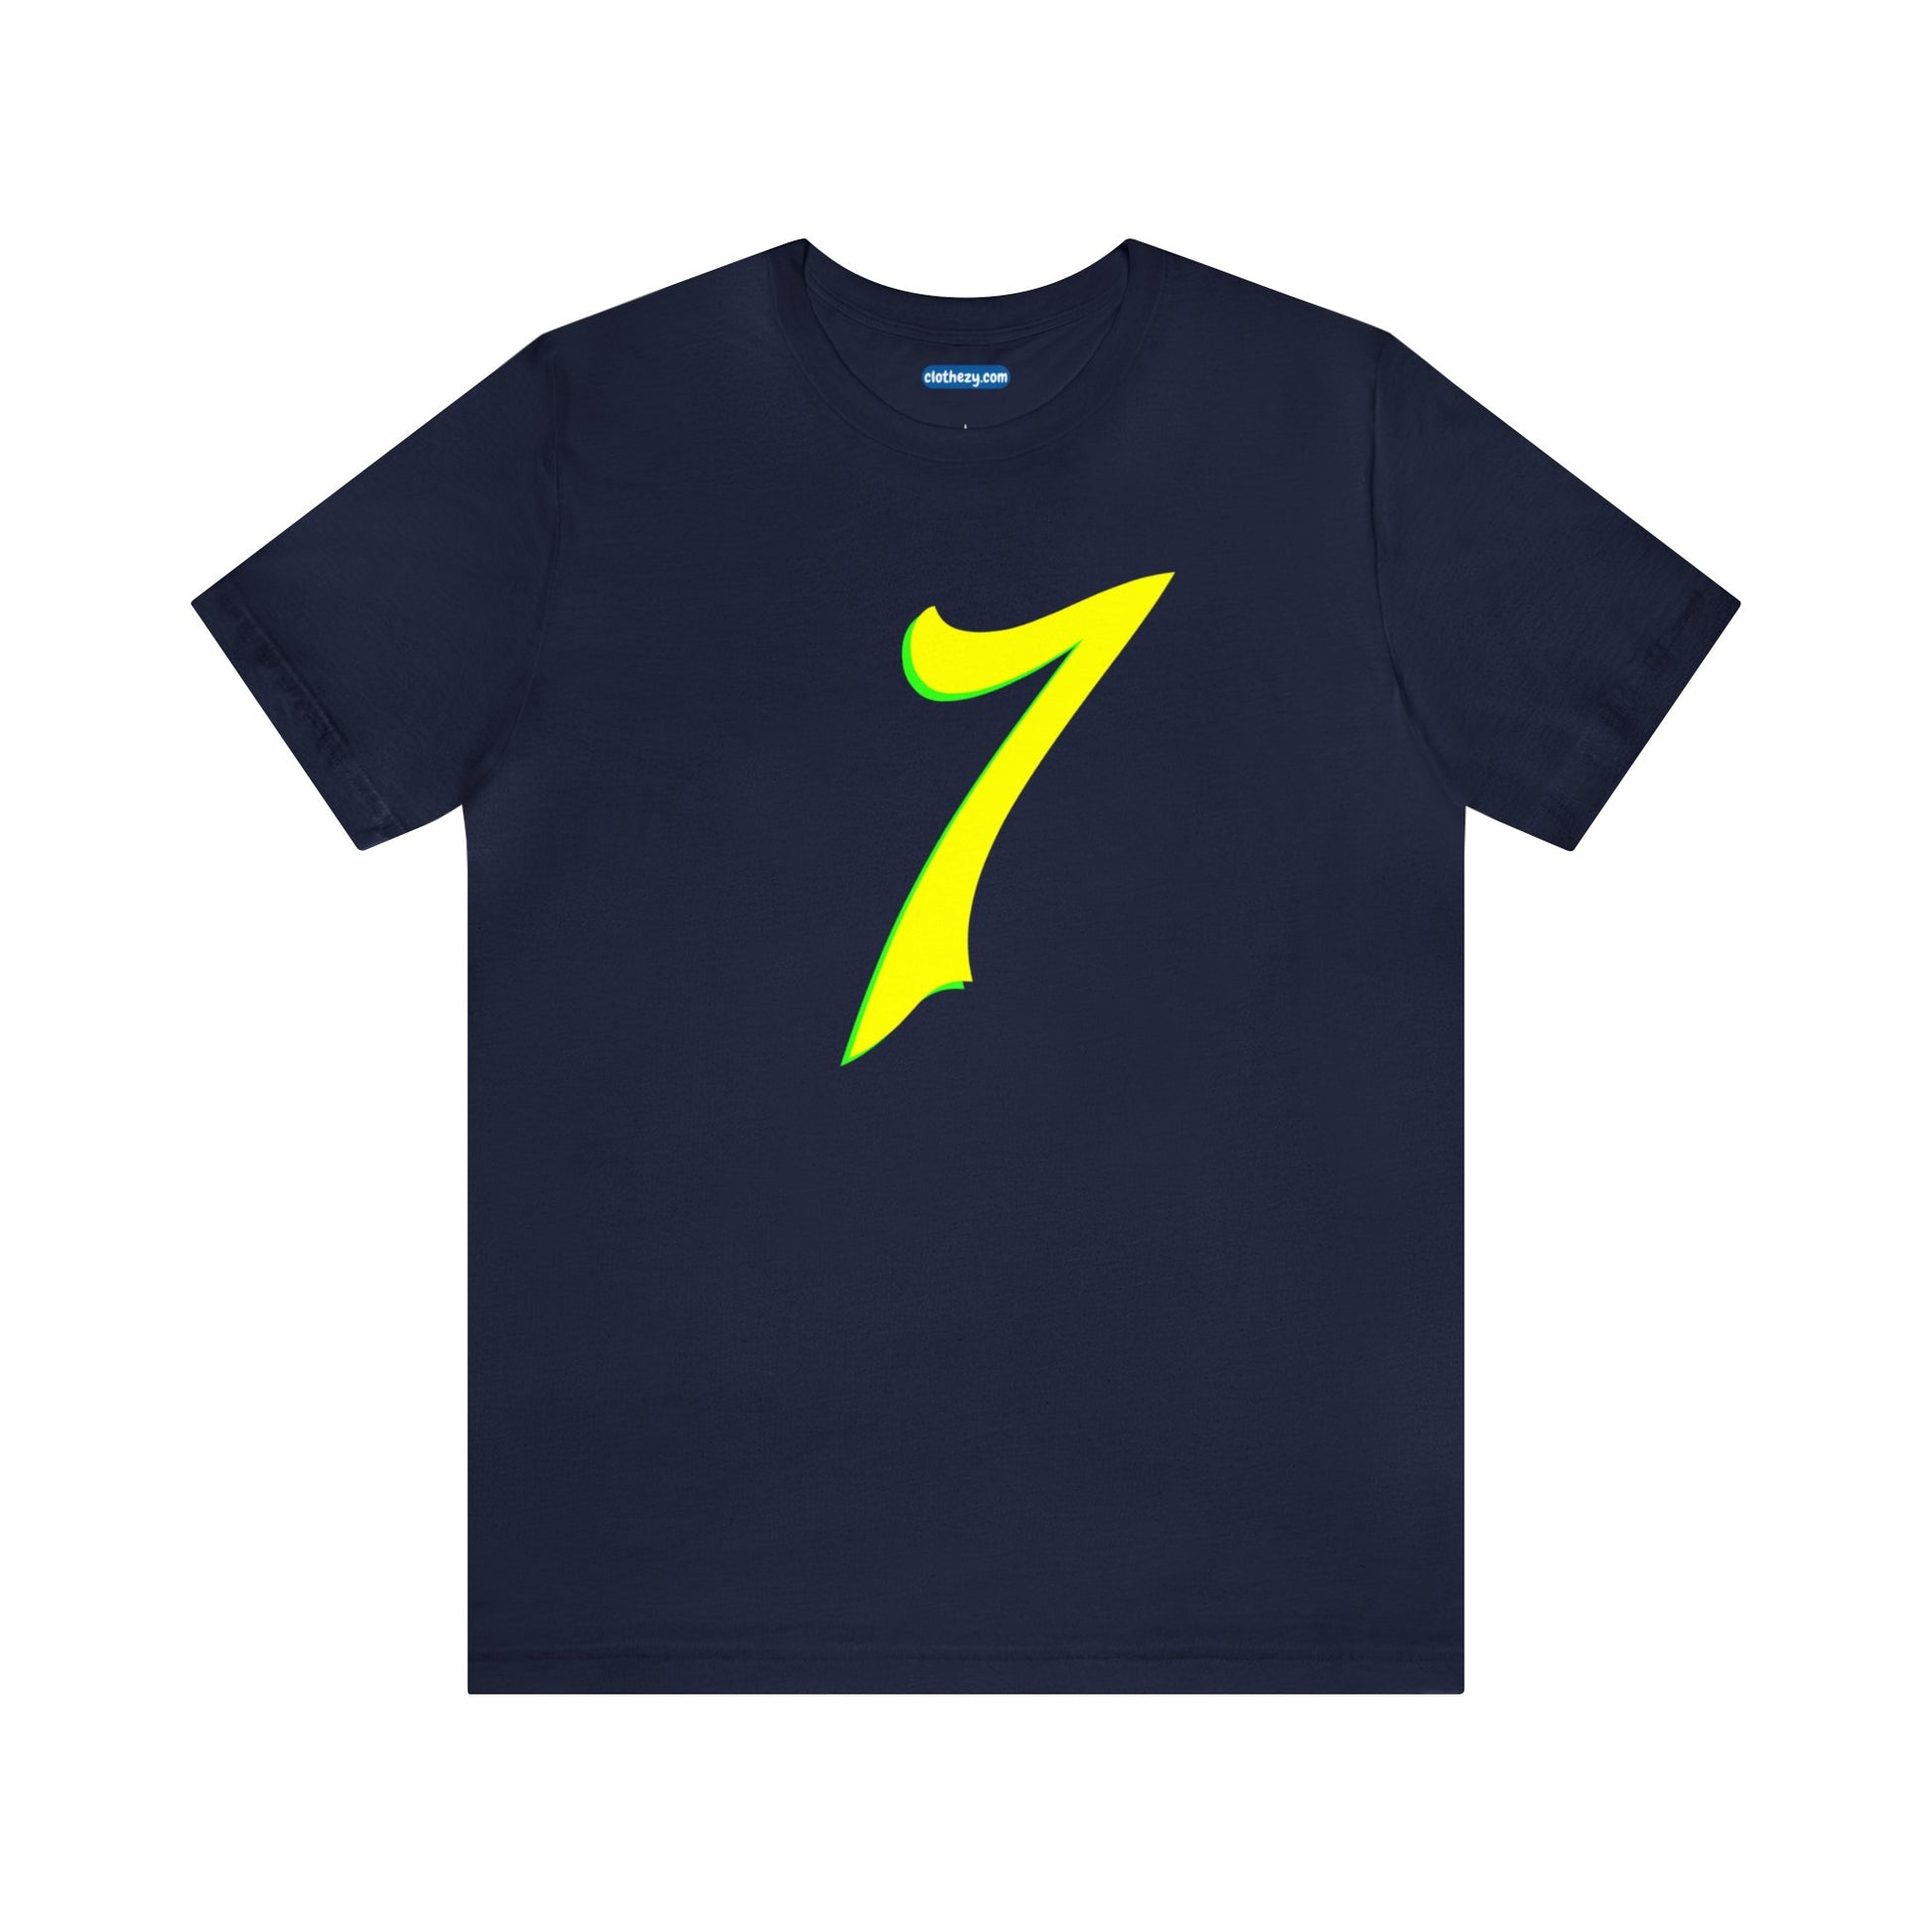 Number 7 Design - Soft Cotton Tee for birthdays and celebrations, Gift for friends and family, Multiple Options by clothezy.com in Navy Size Small - Buy Now